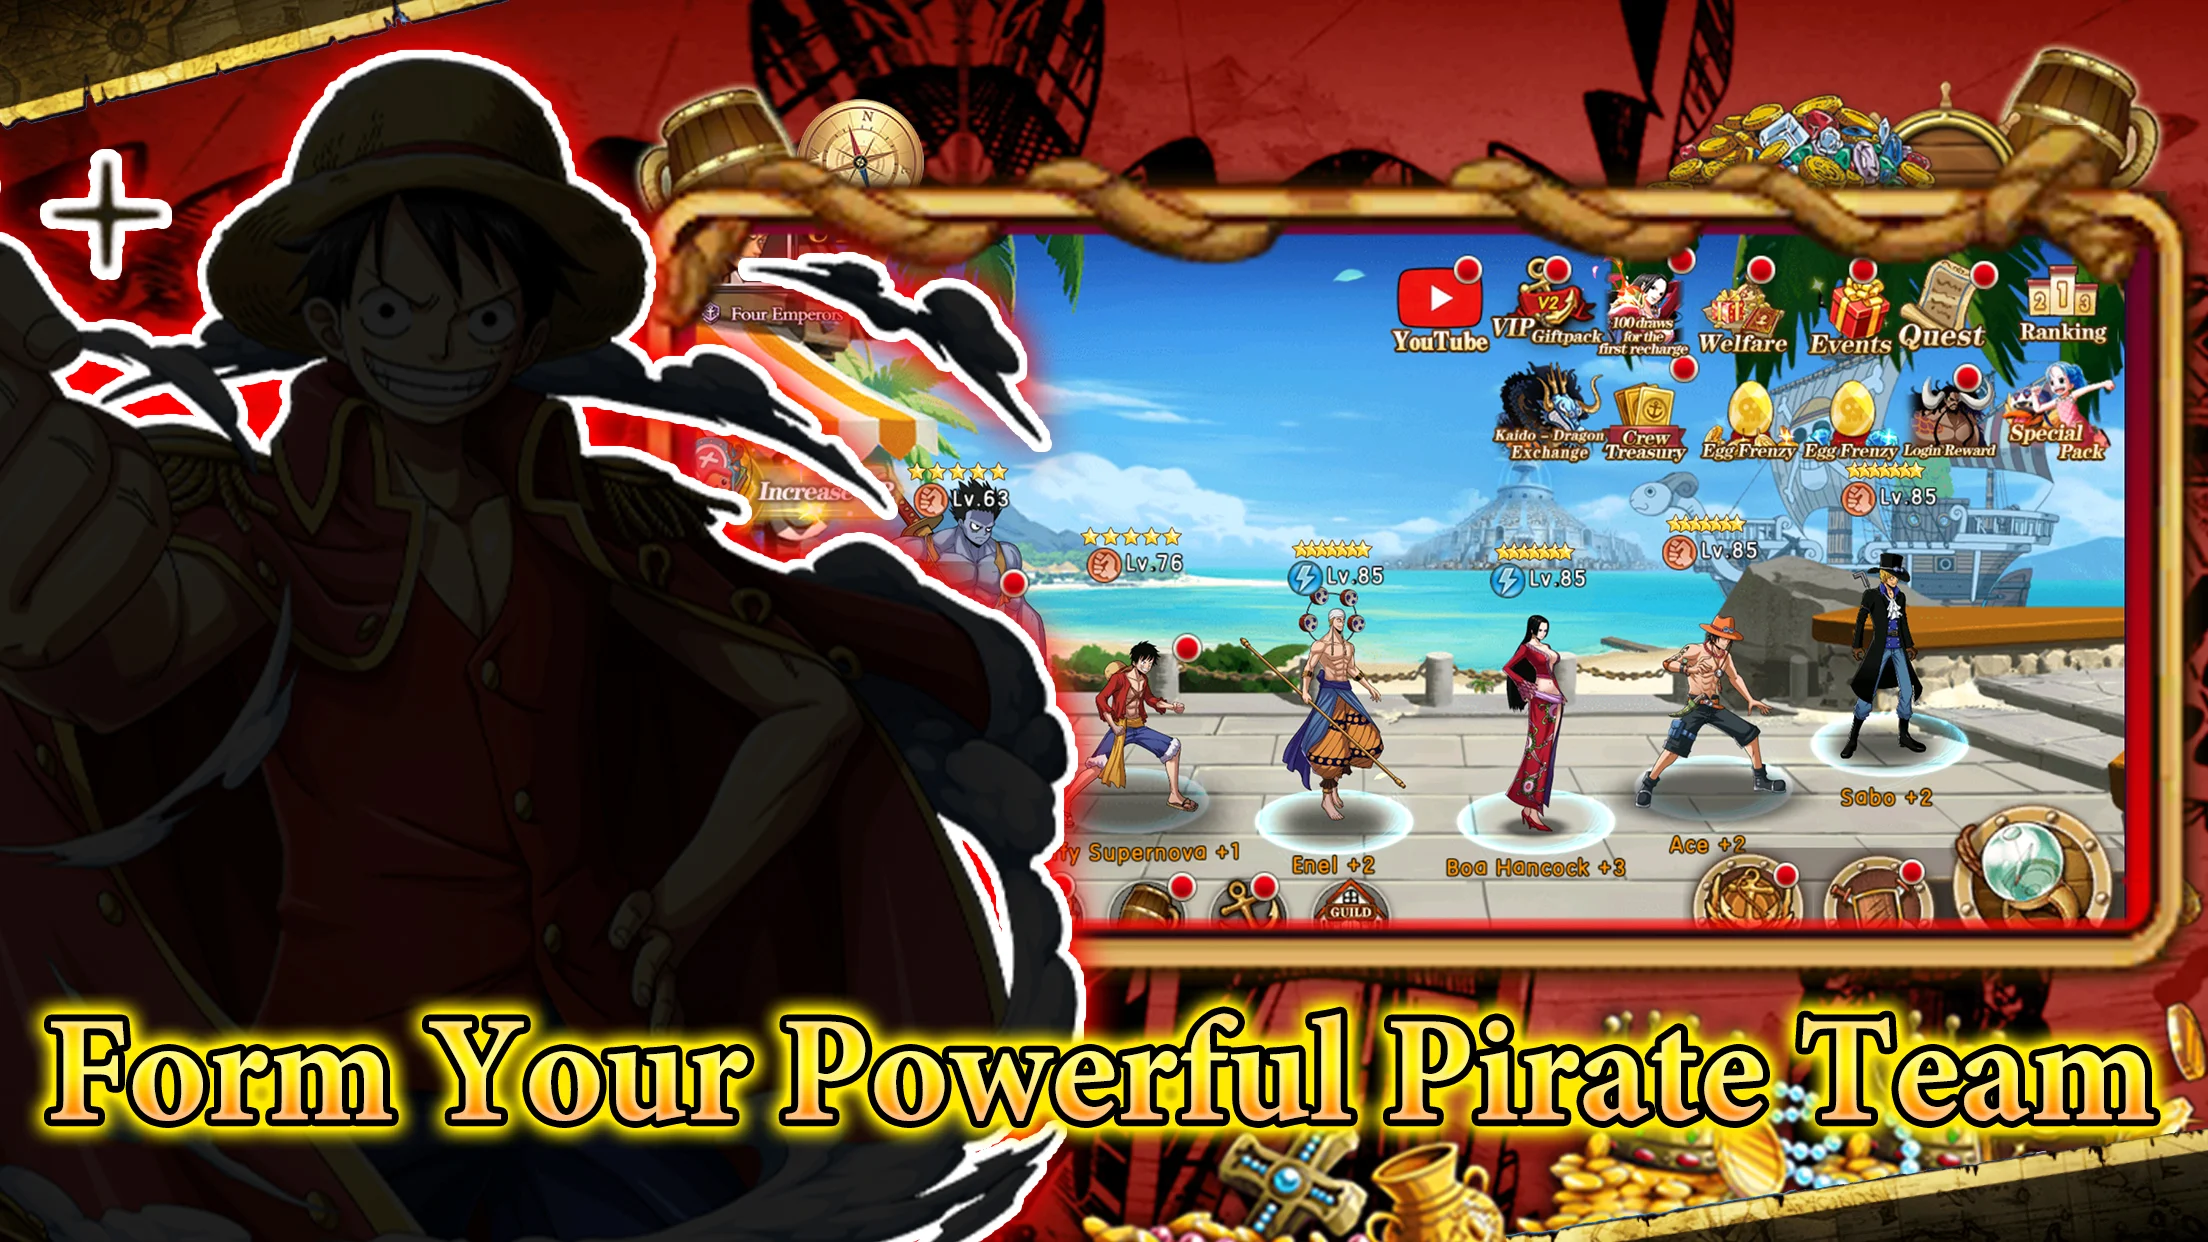 Pirate Ocean Adventure All New Gift Codes 2020 I All New Redeem Codes 2020 Pirate  Ocean Adventure 